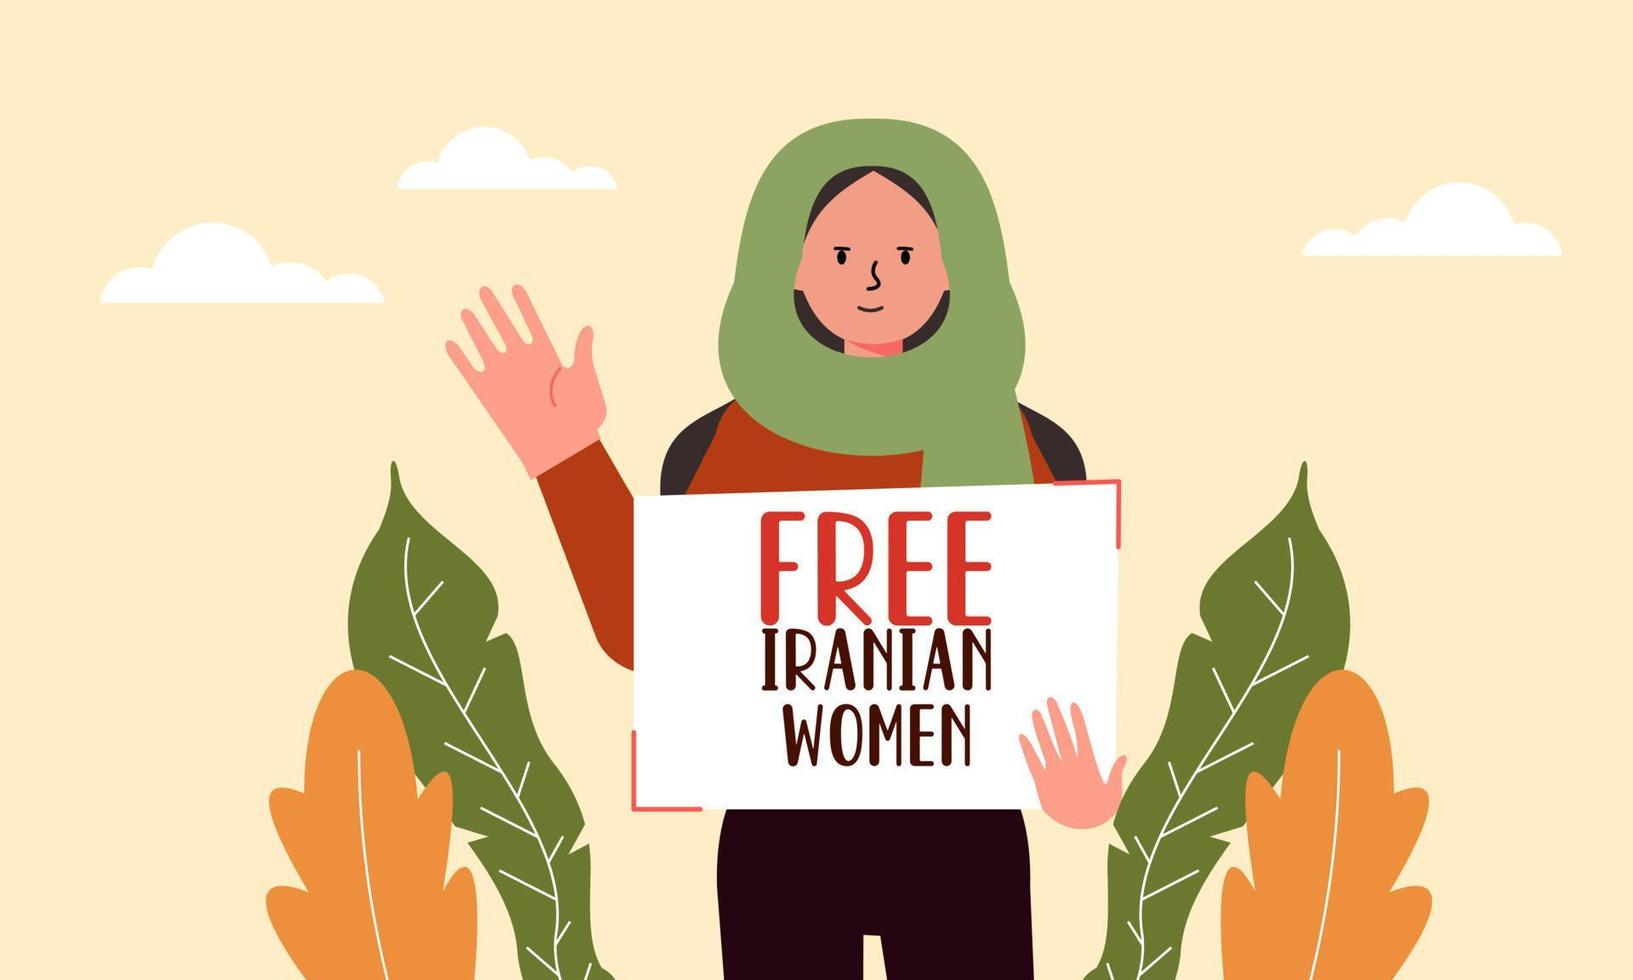 Hand drawn iranian women protesting together illustration vector